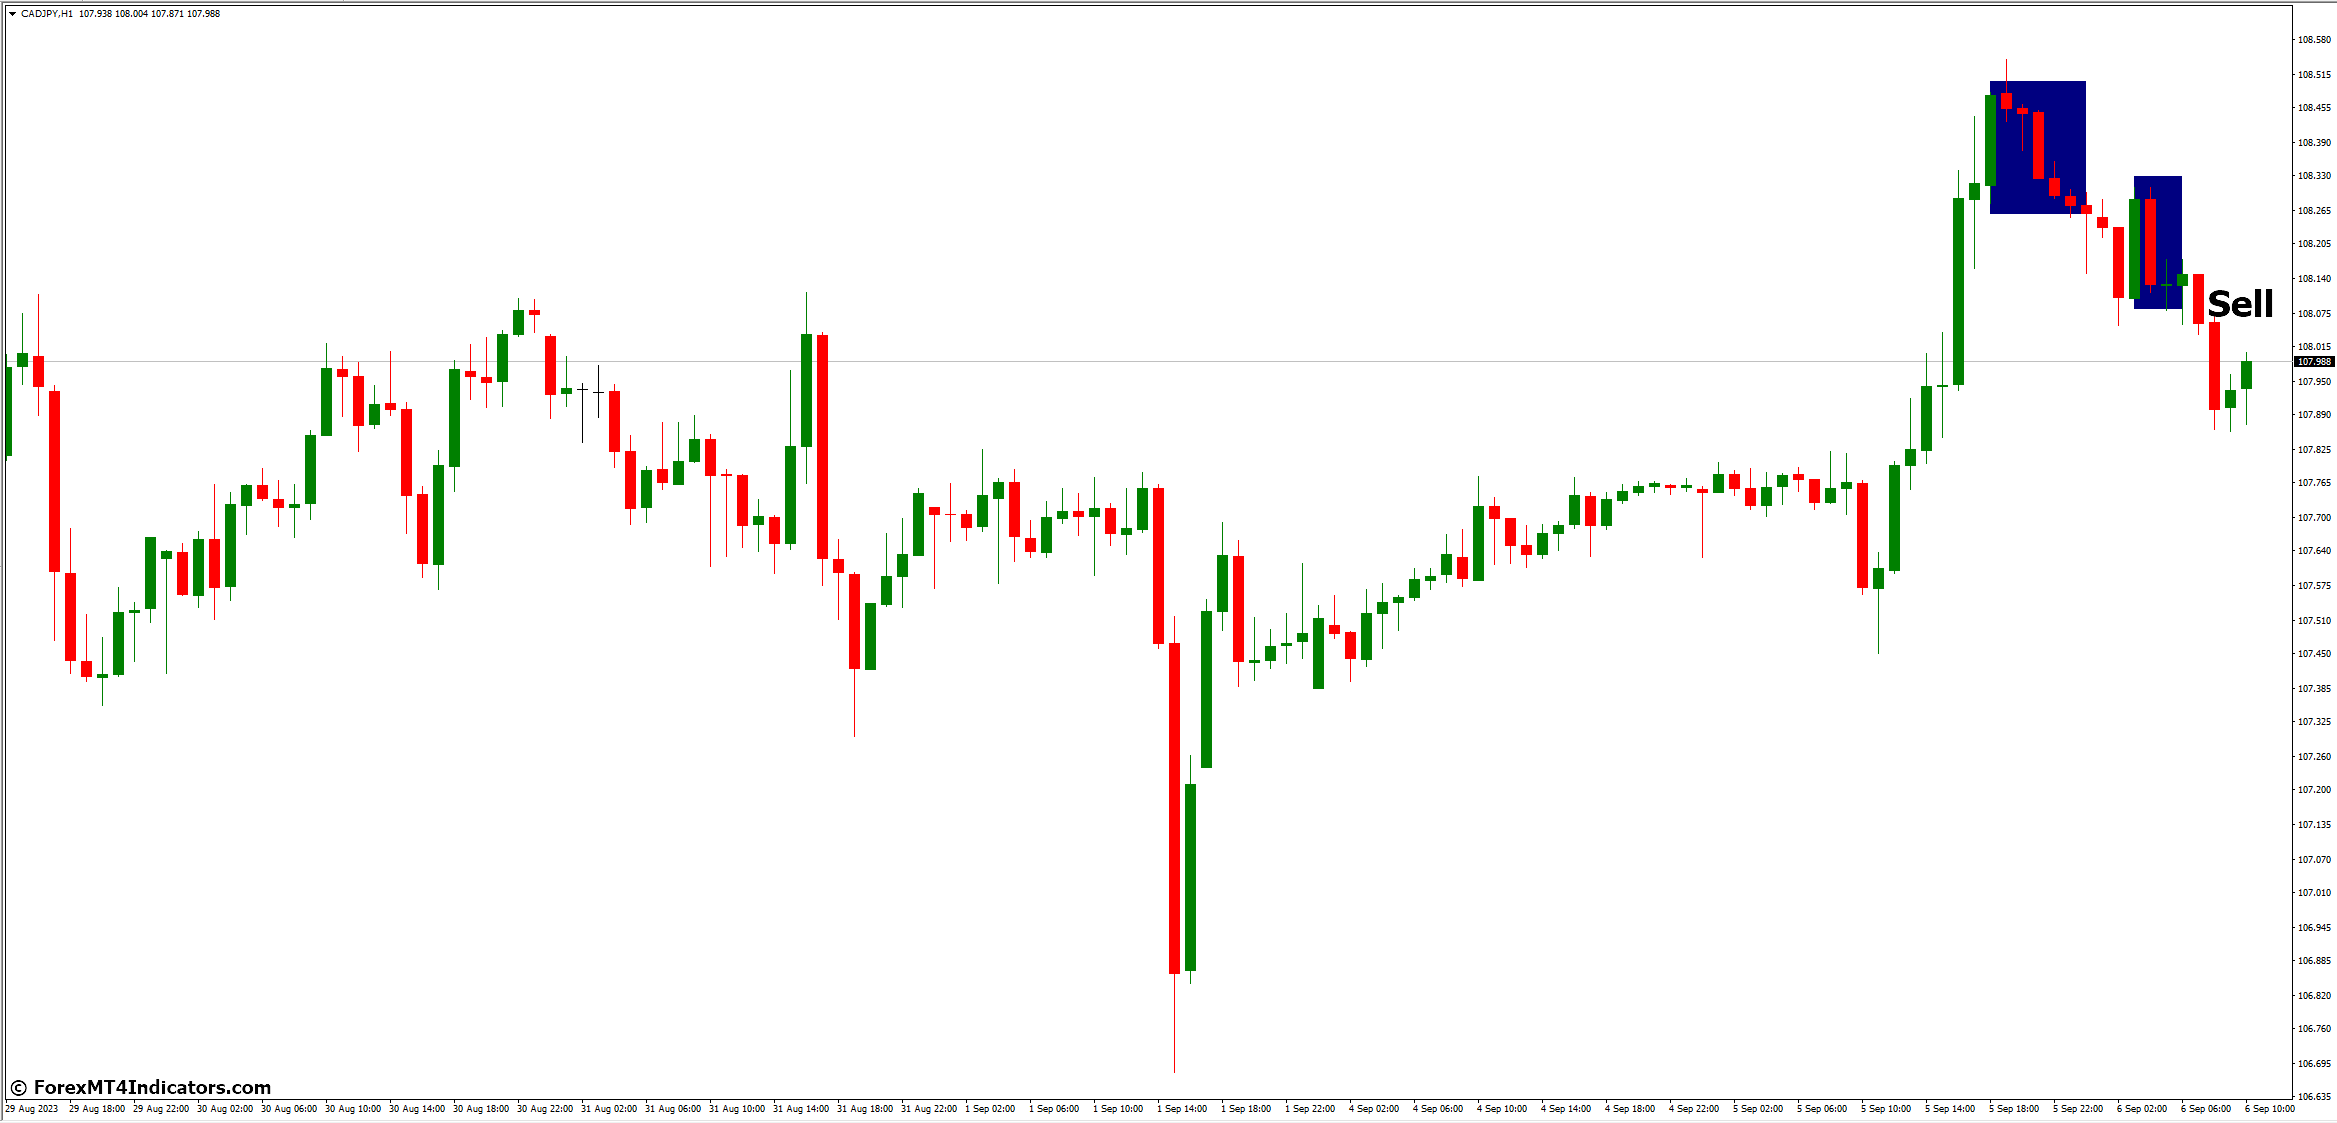 How to Trade with Sideways Detector MT4 Indicator - Sell Entry